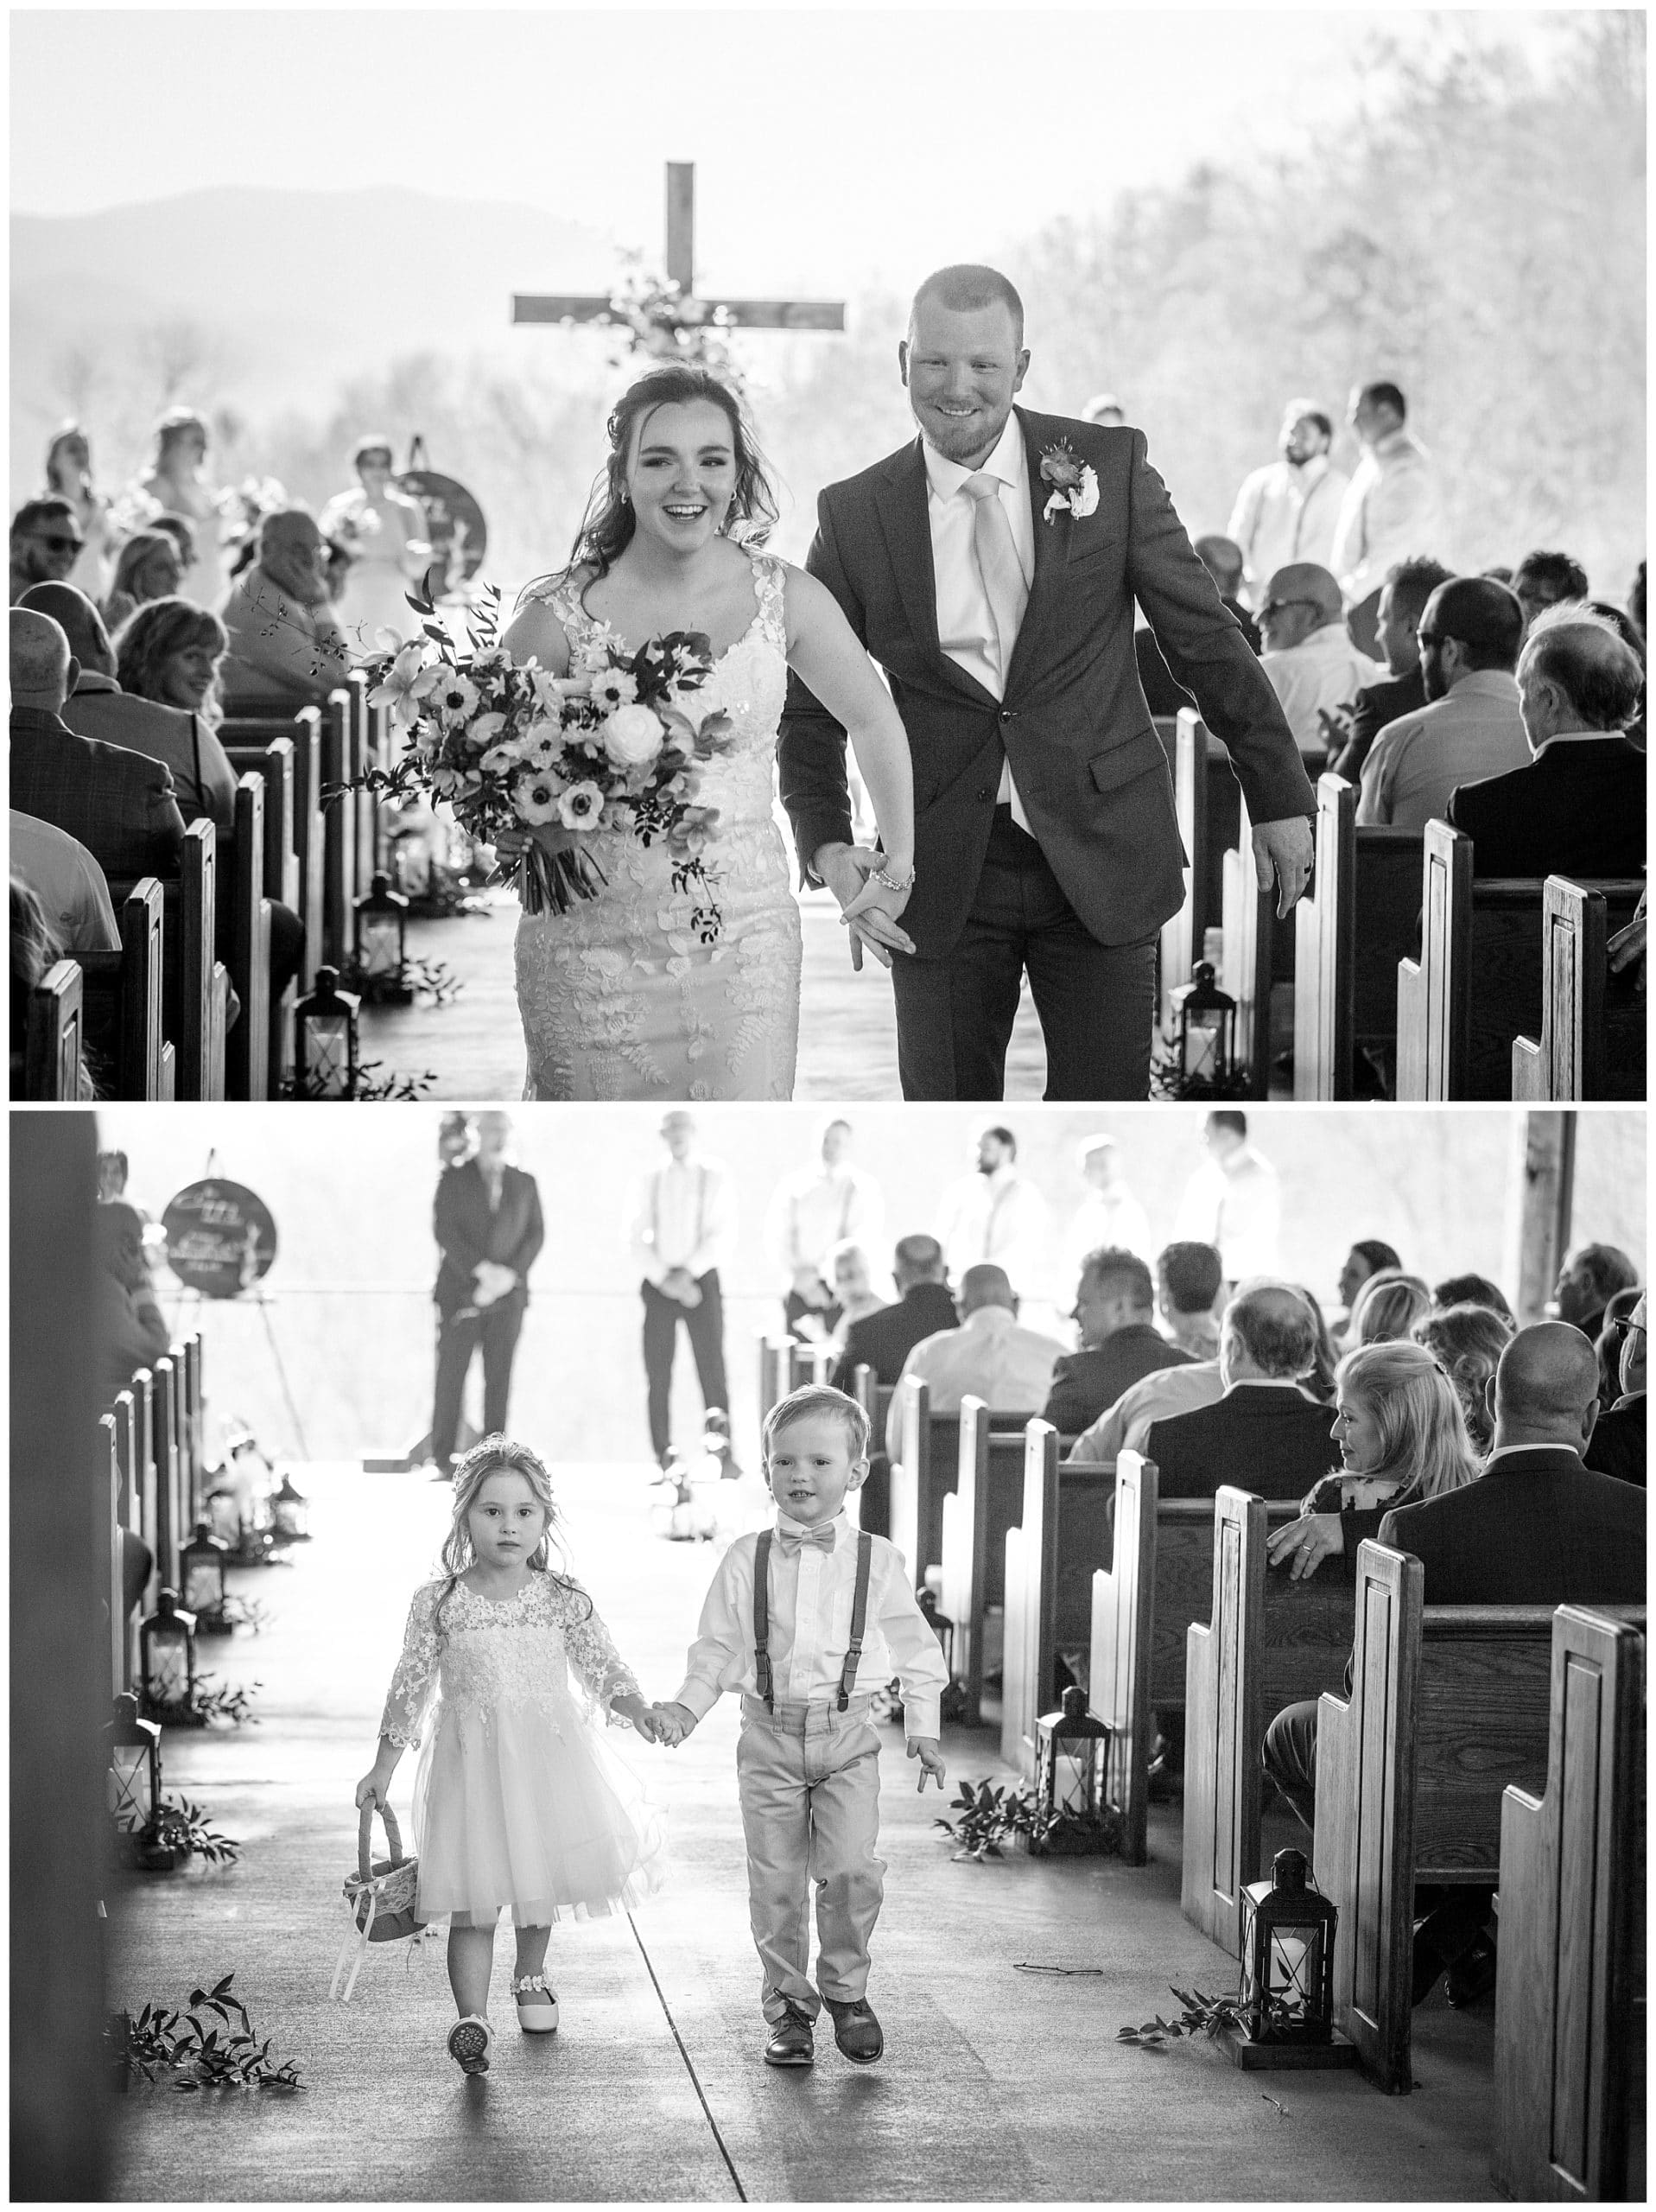 Bride and groom exit ceremony followed by ring bearer and flowergirl holding hands and smiling